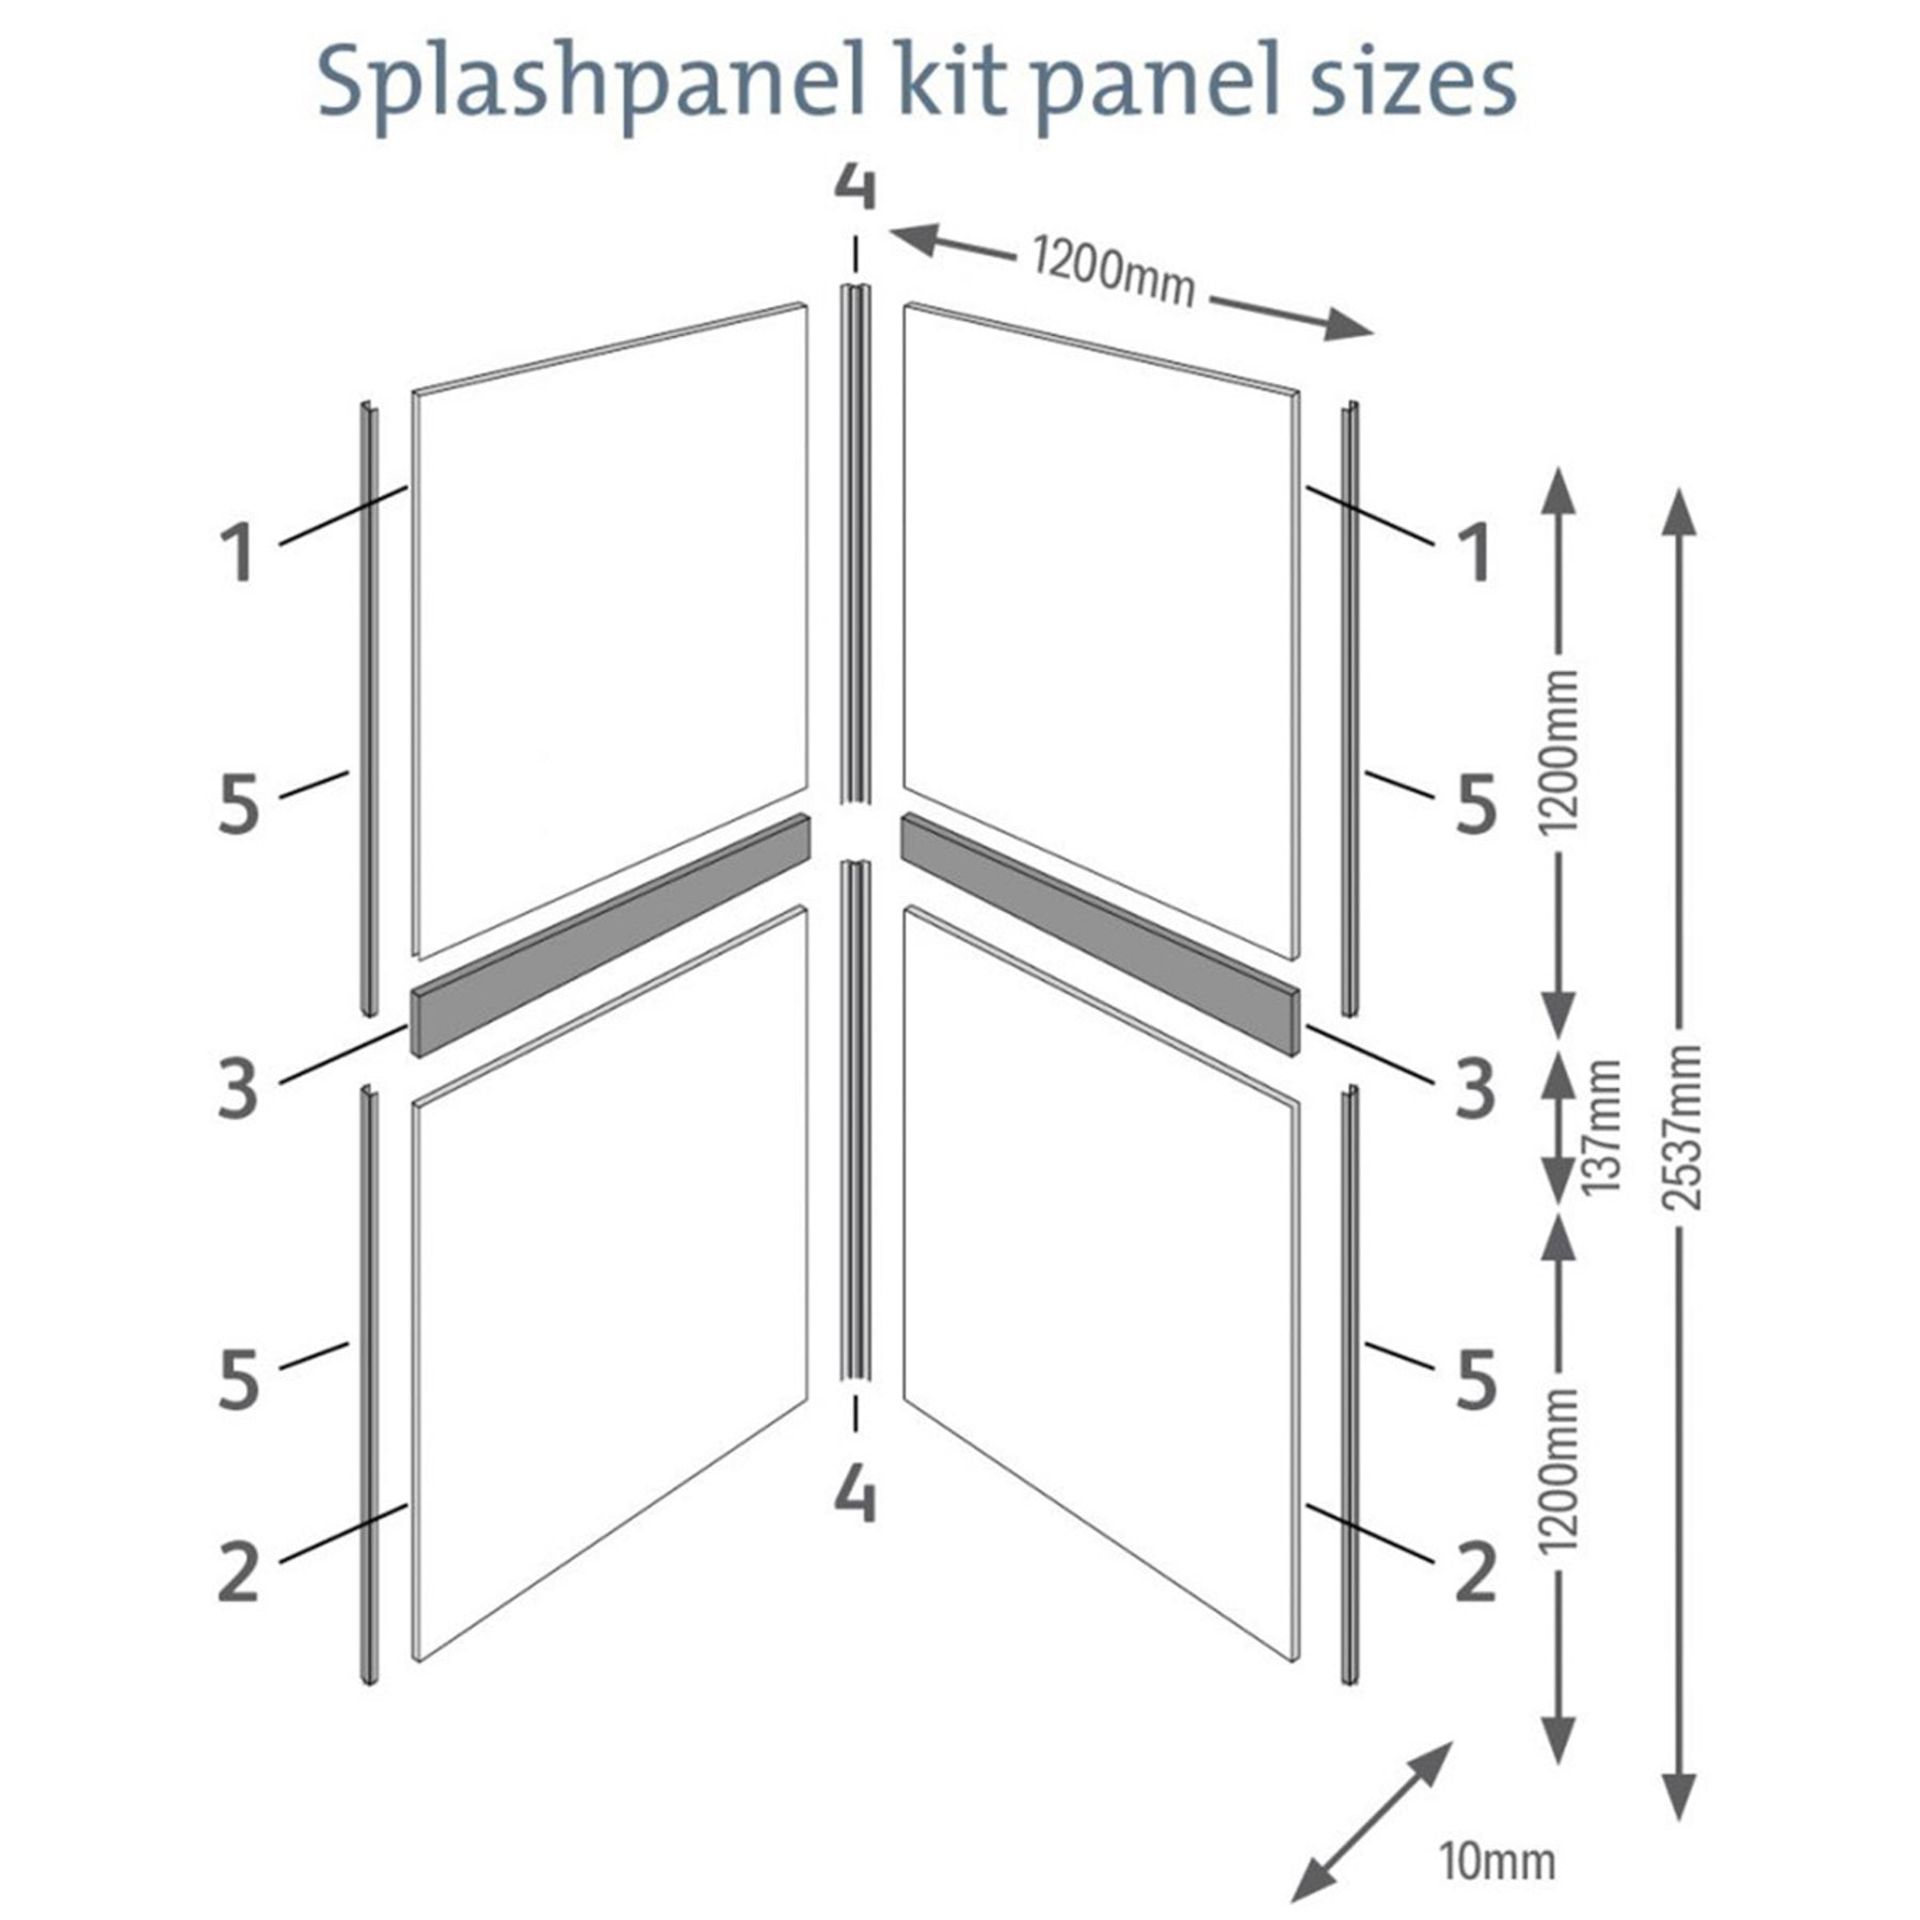 Splash Panel 2 sided shower wall kit in Sandstone Matt, new and boxed, the kit contains 2 - Image 5 of 5